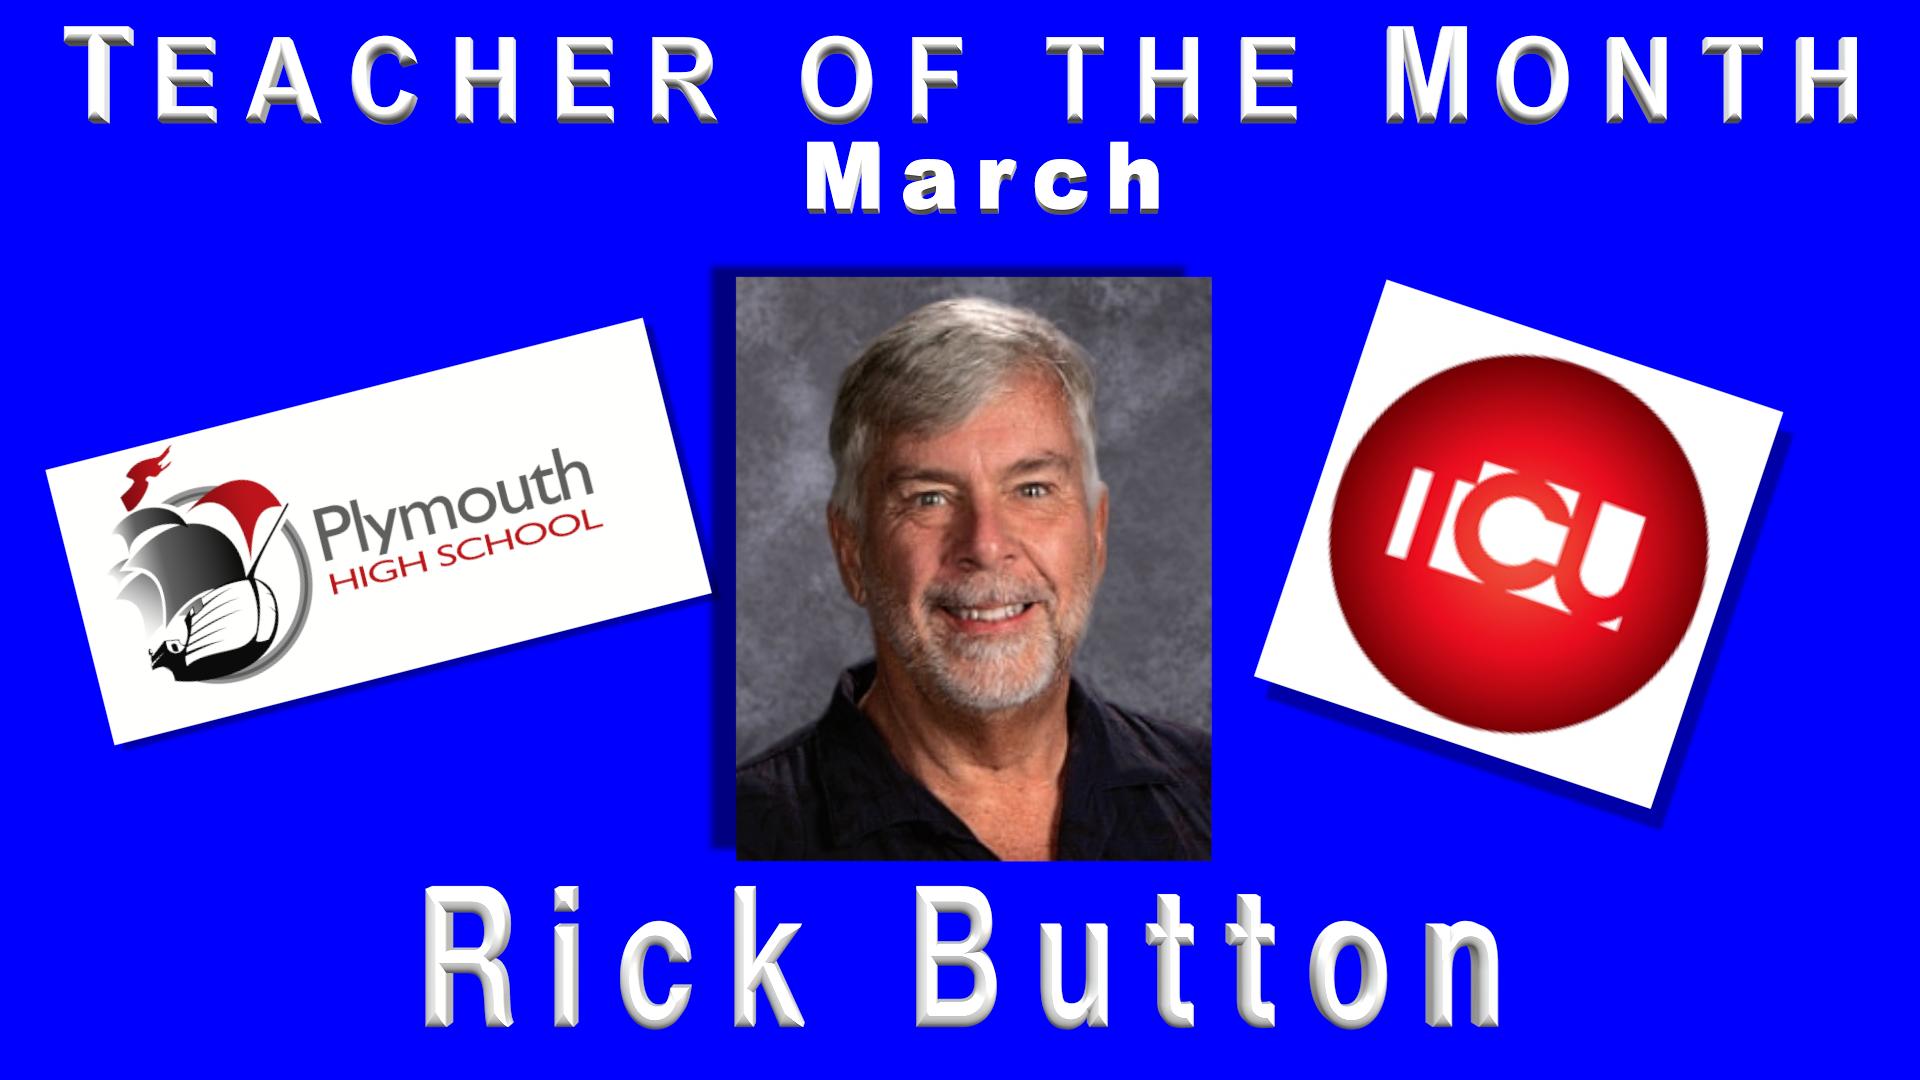 Teacher of the Month March Rick Button with Plymouth High School and Teachers Credit Union Logo on a blue background.